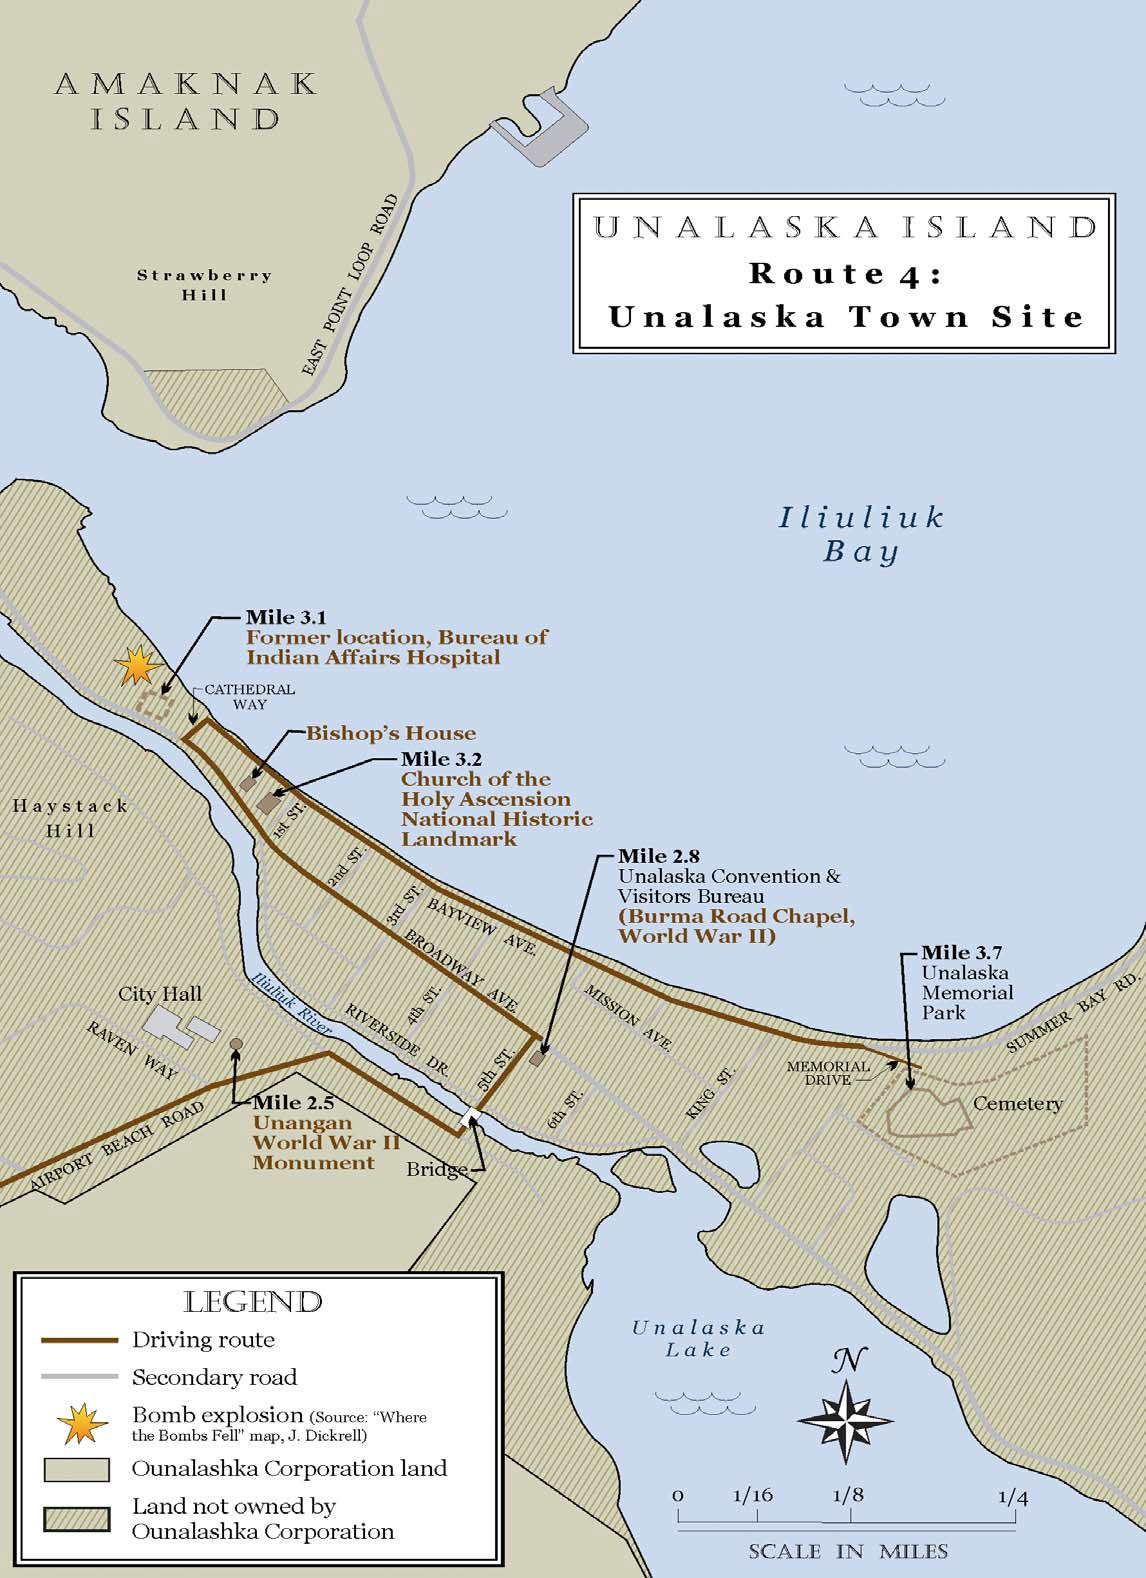 map showing driving route along a peninsula on Unalaska Island highlighting 5 sites